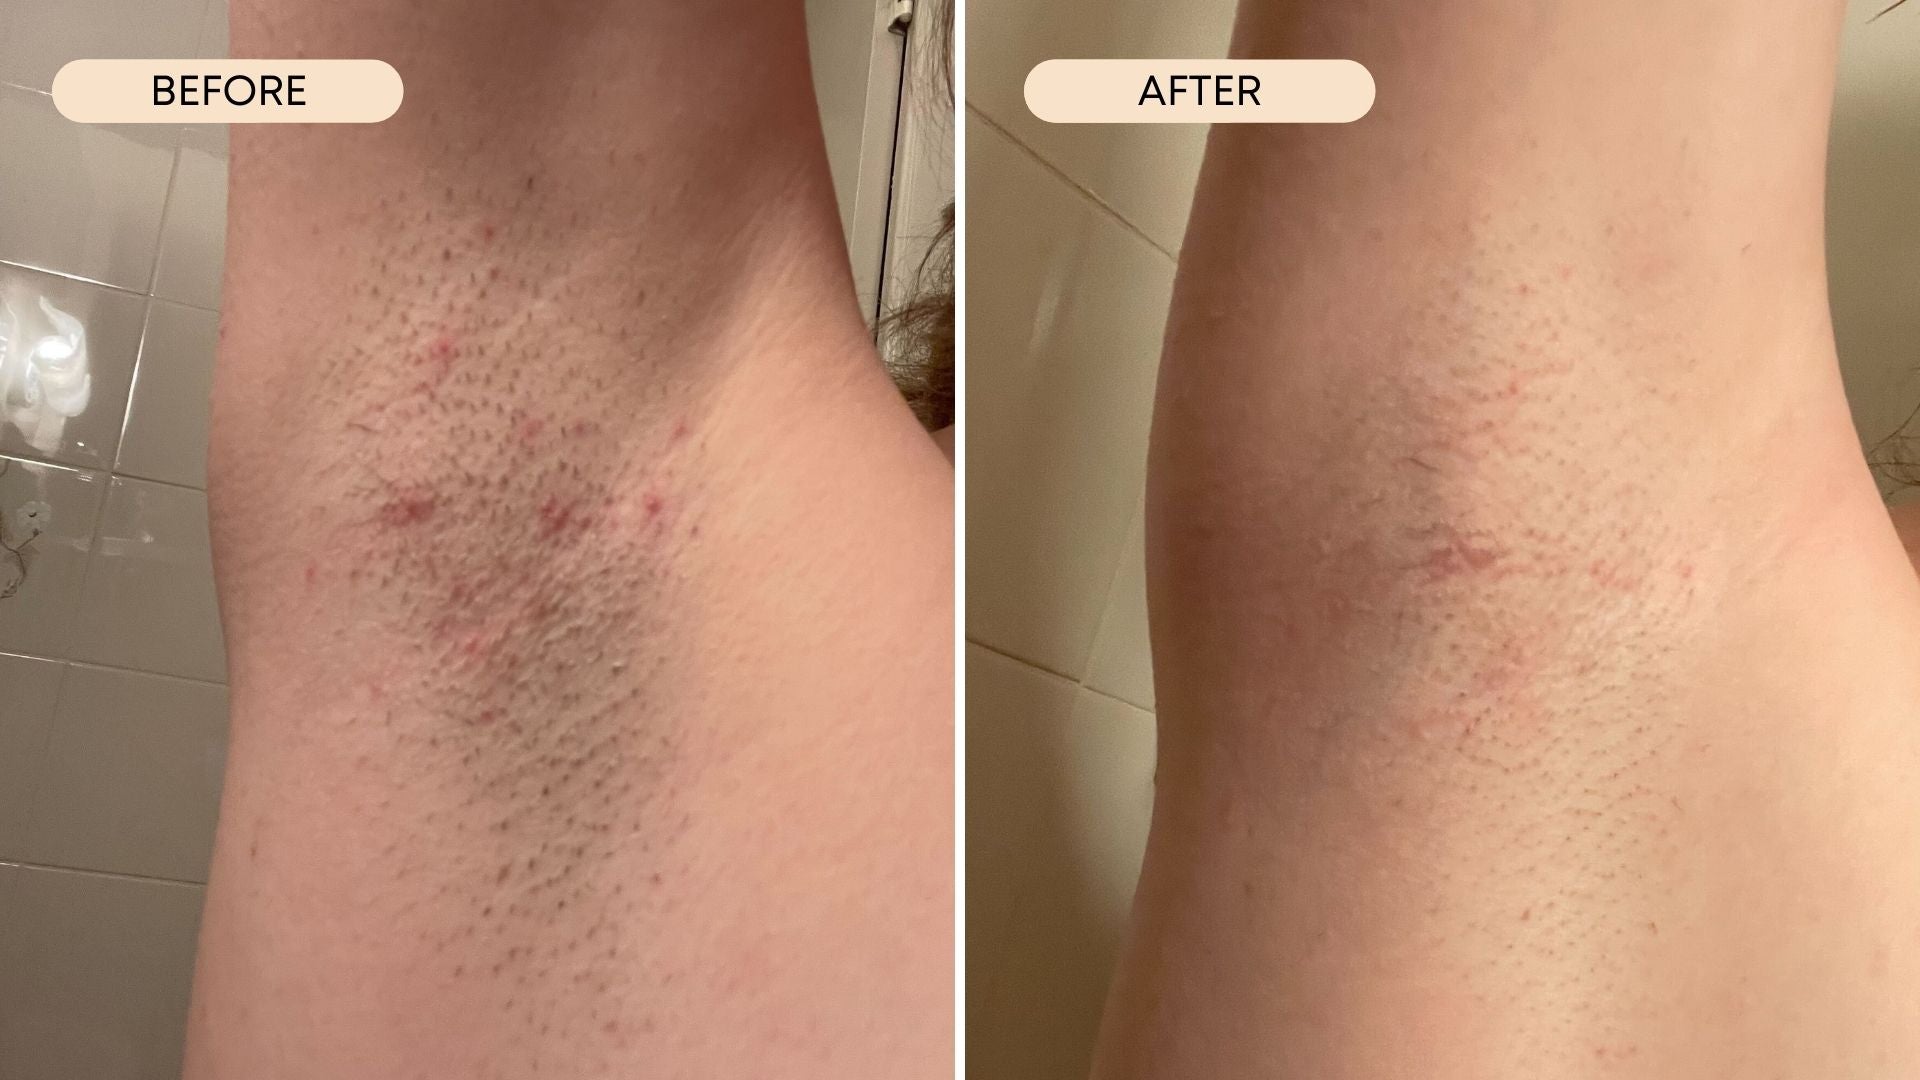 Official armpit ingrown hair before and after photos of it healing 